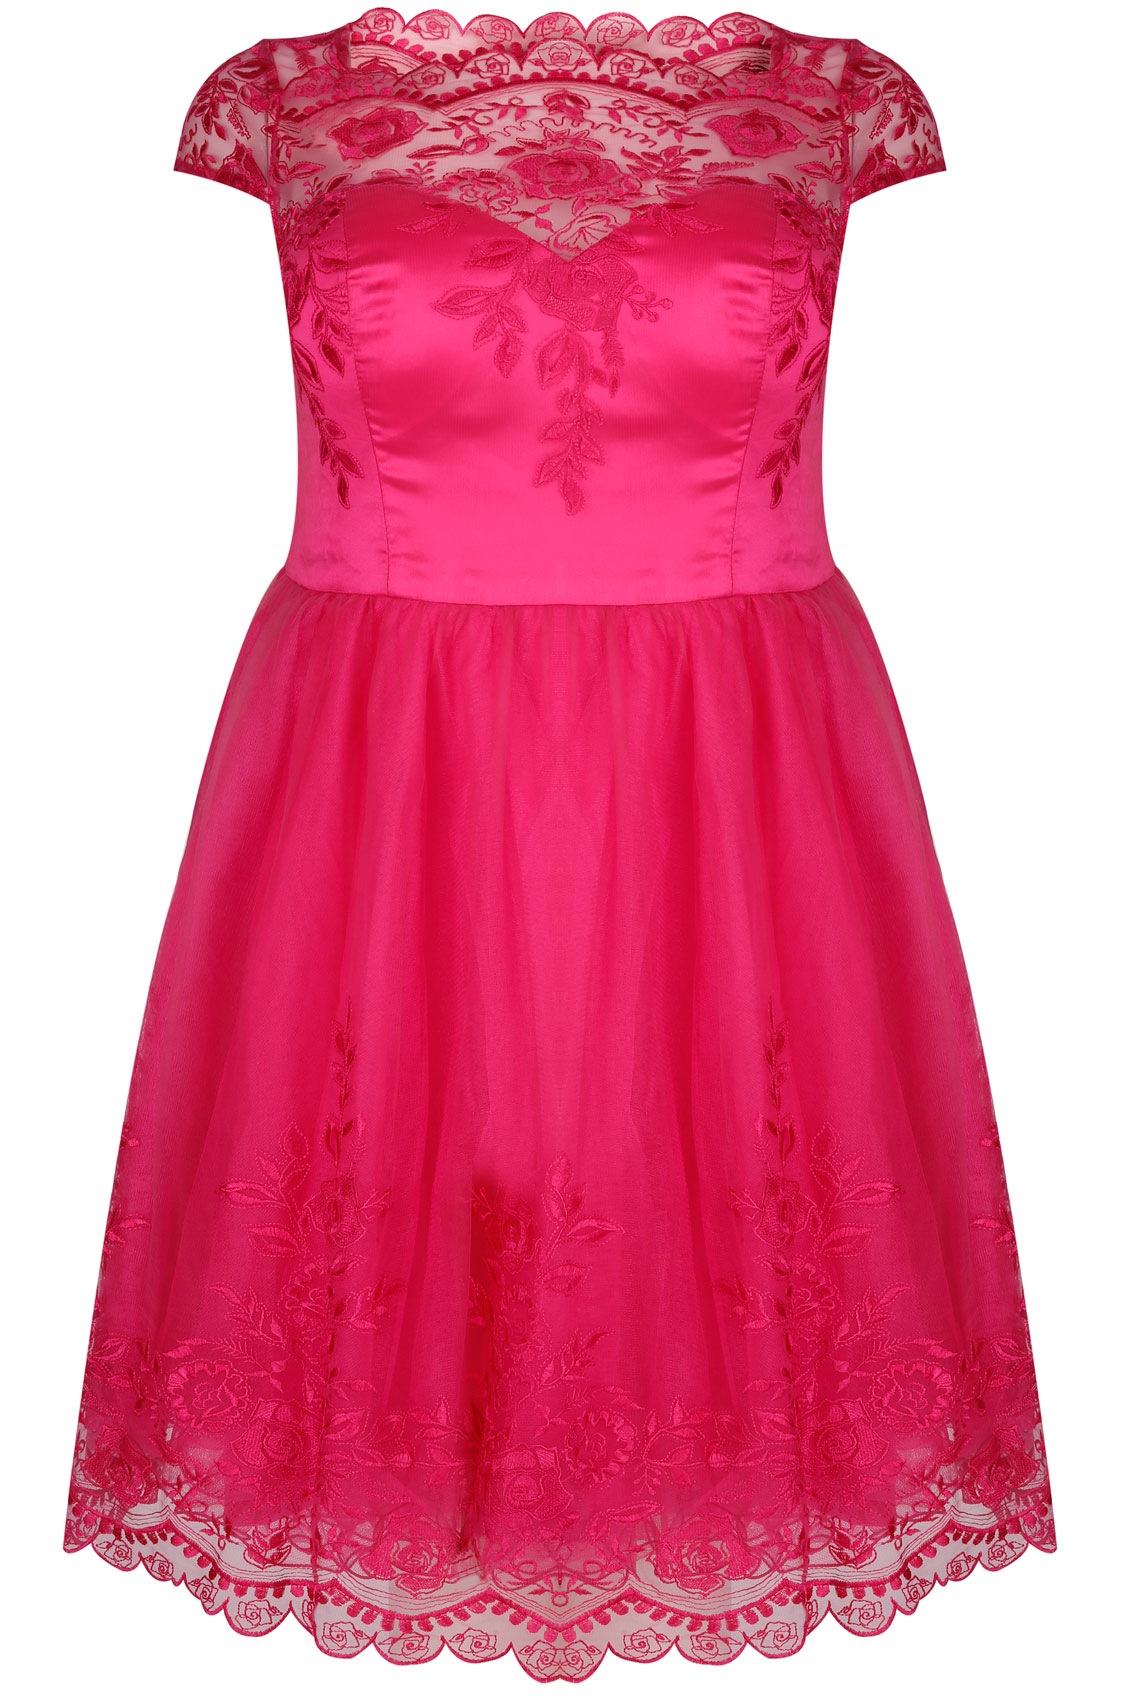 CHI CHI LONDON Hot Pink Sweetheart Embroidered Party Dress Plus size 16 ...